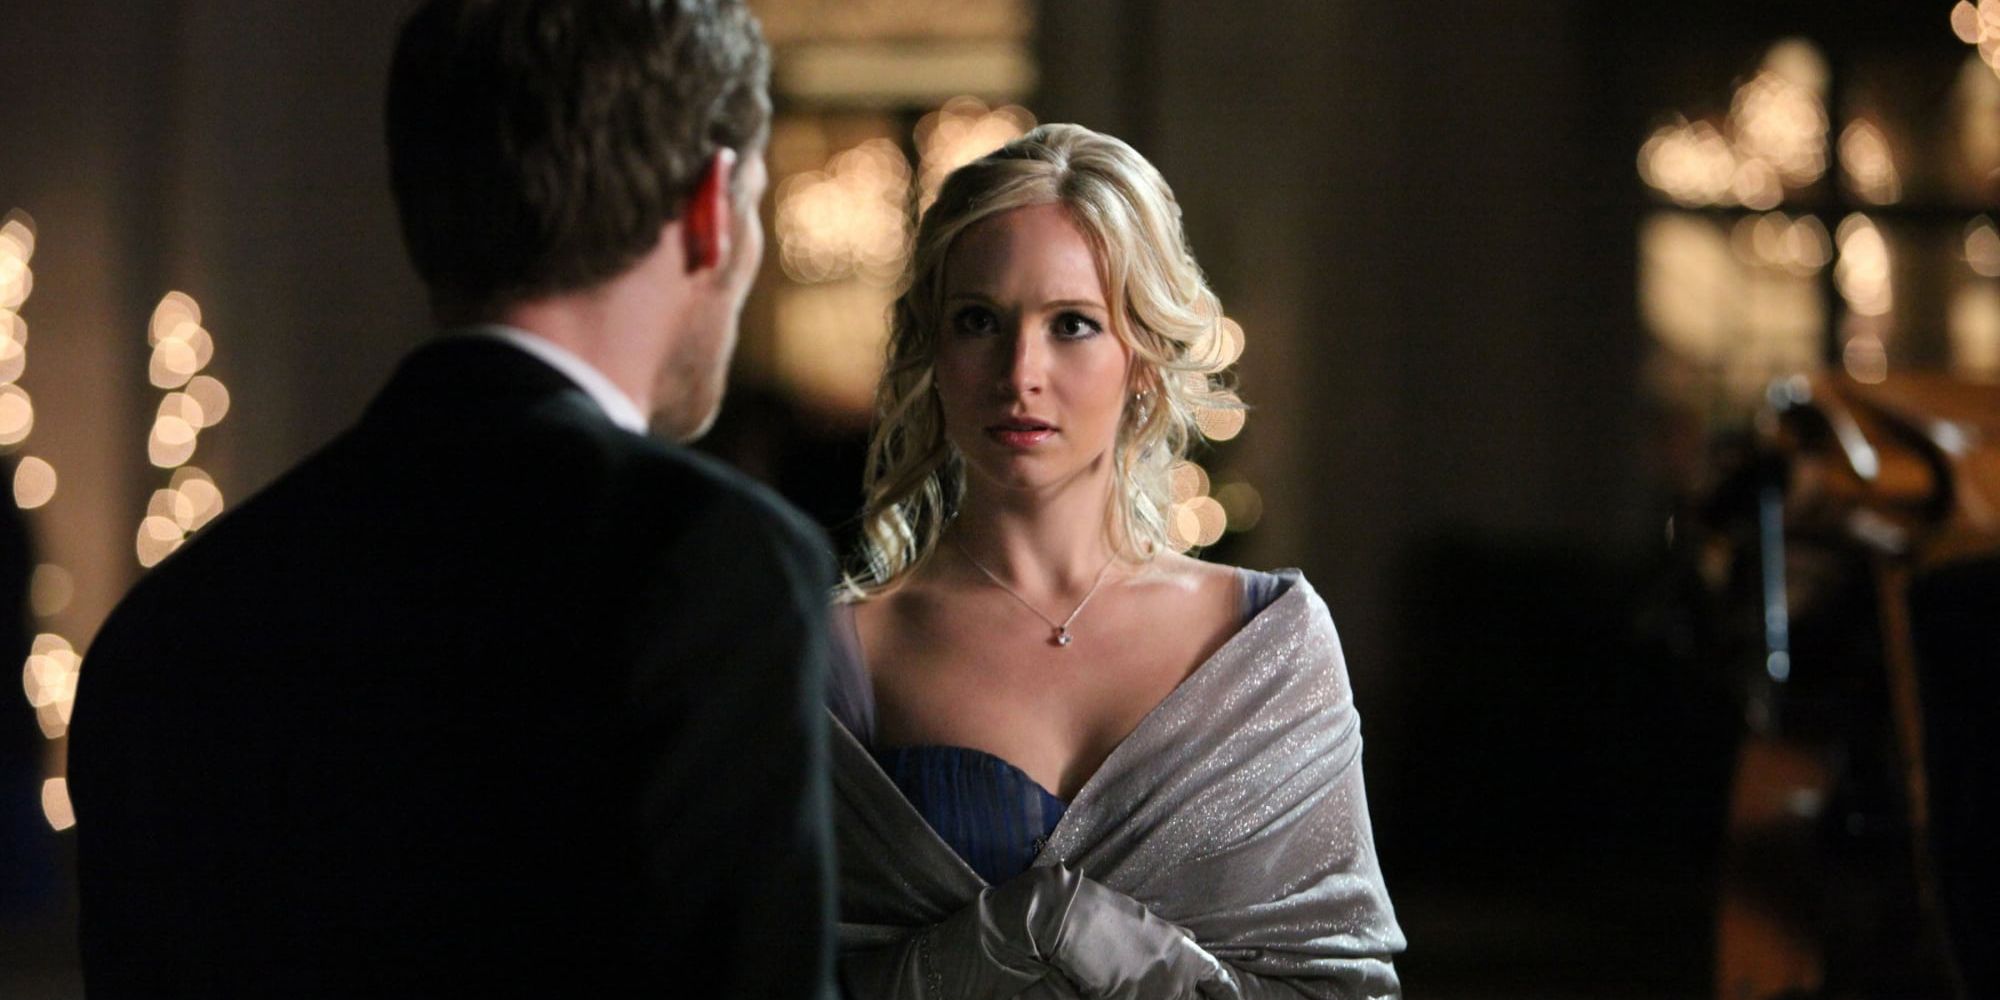 Klaus and Caroline at the ball in The Vampire Diaries.